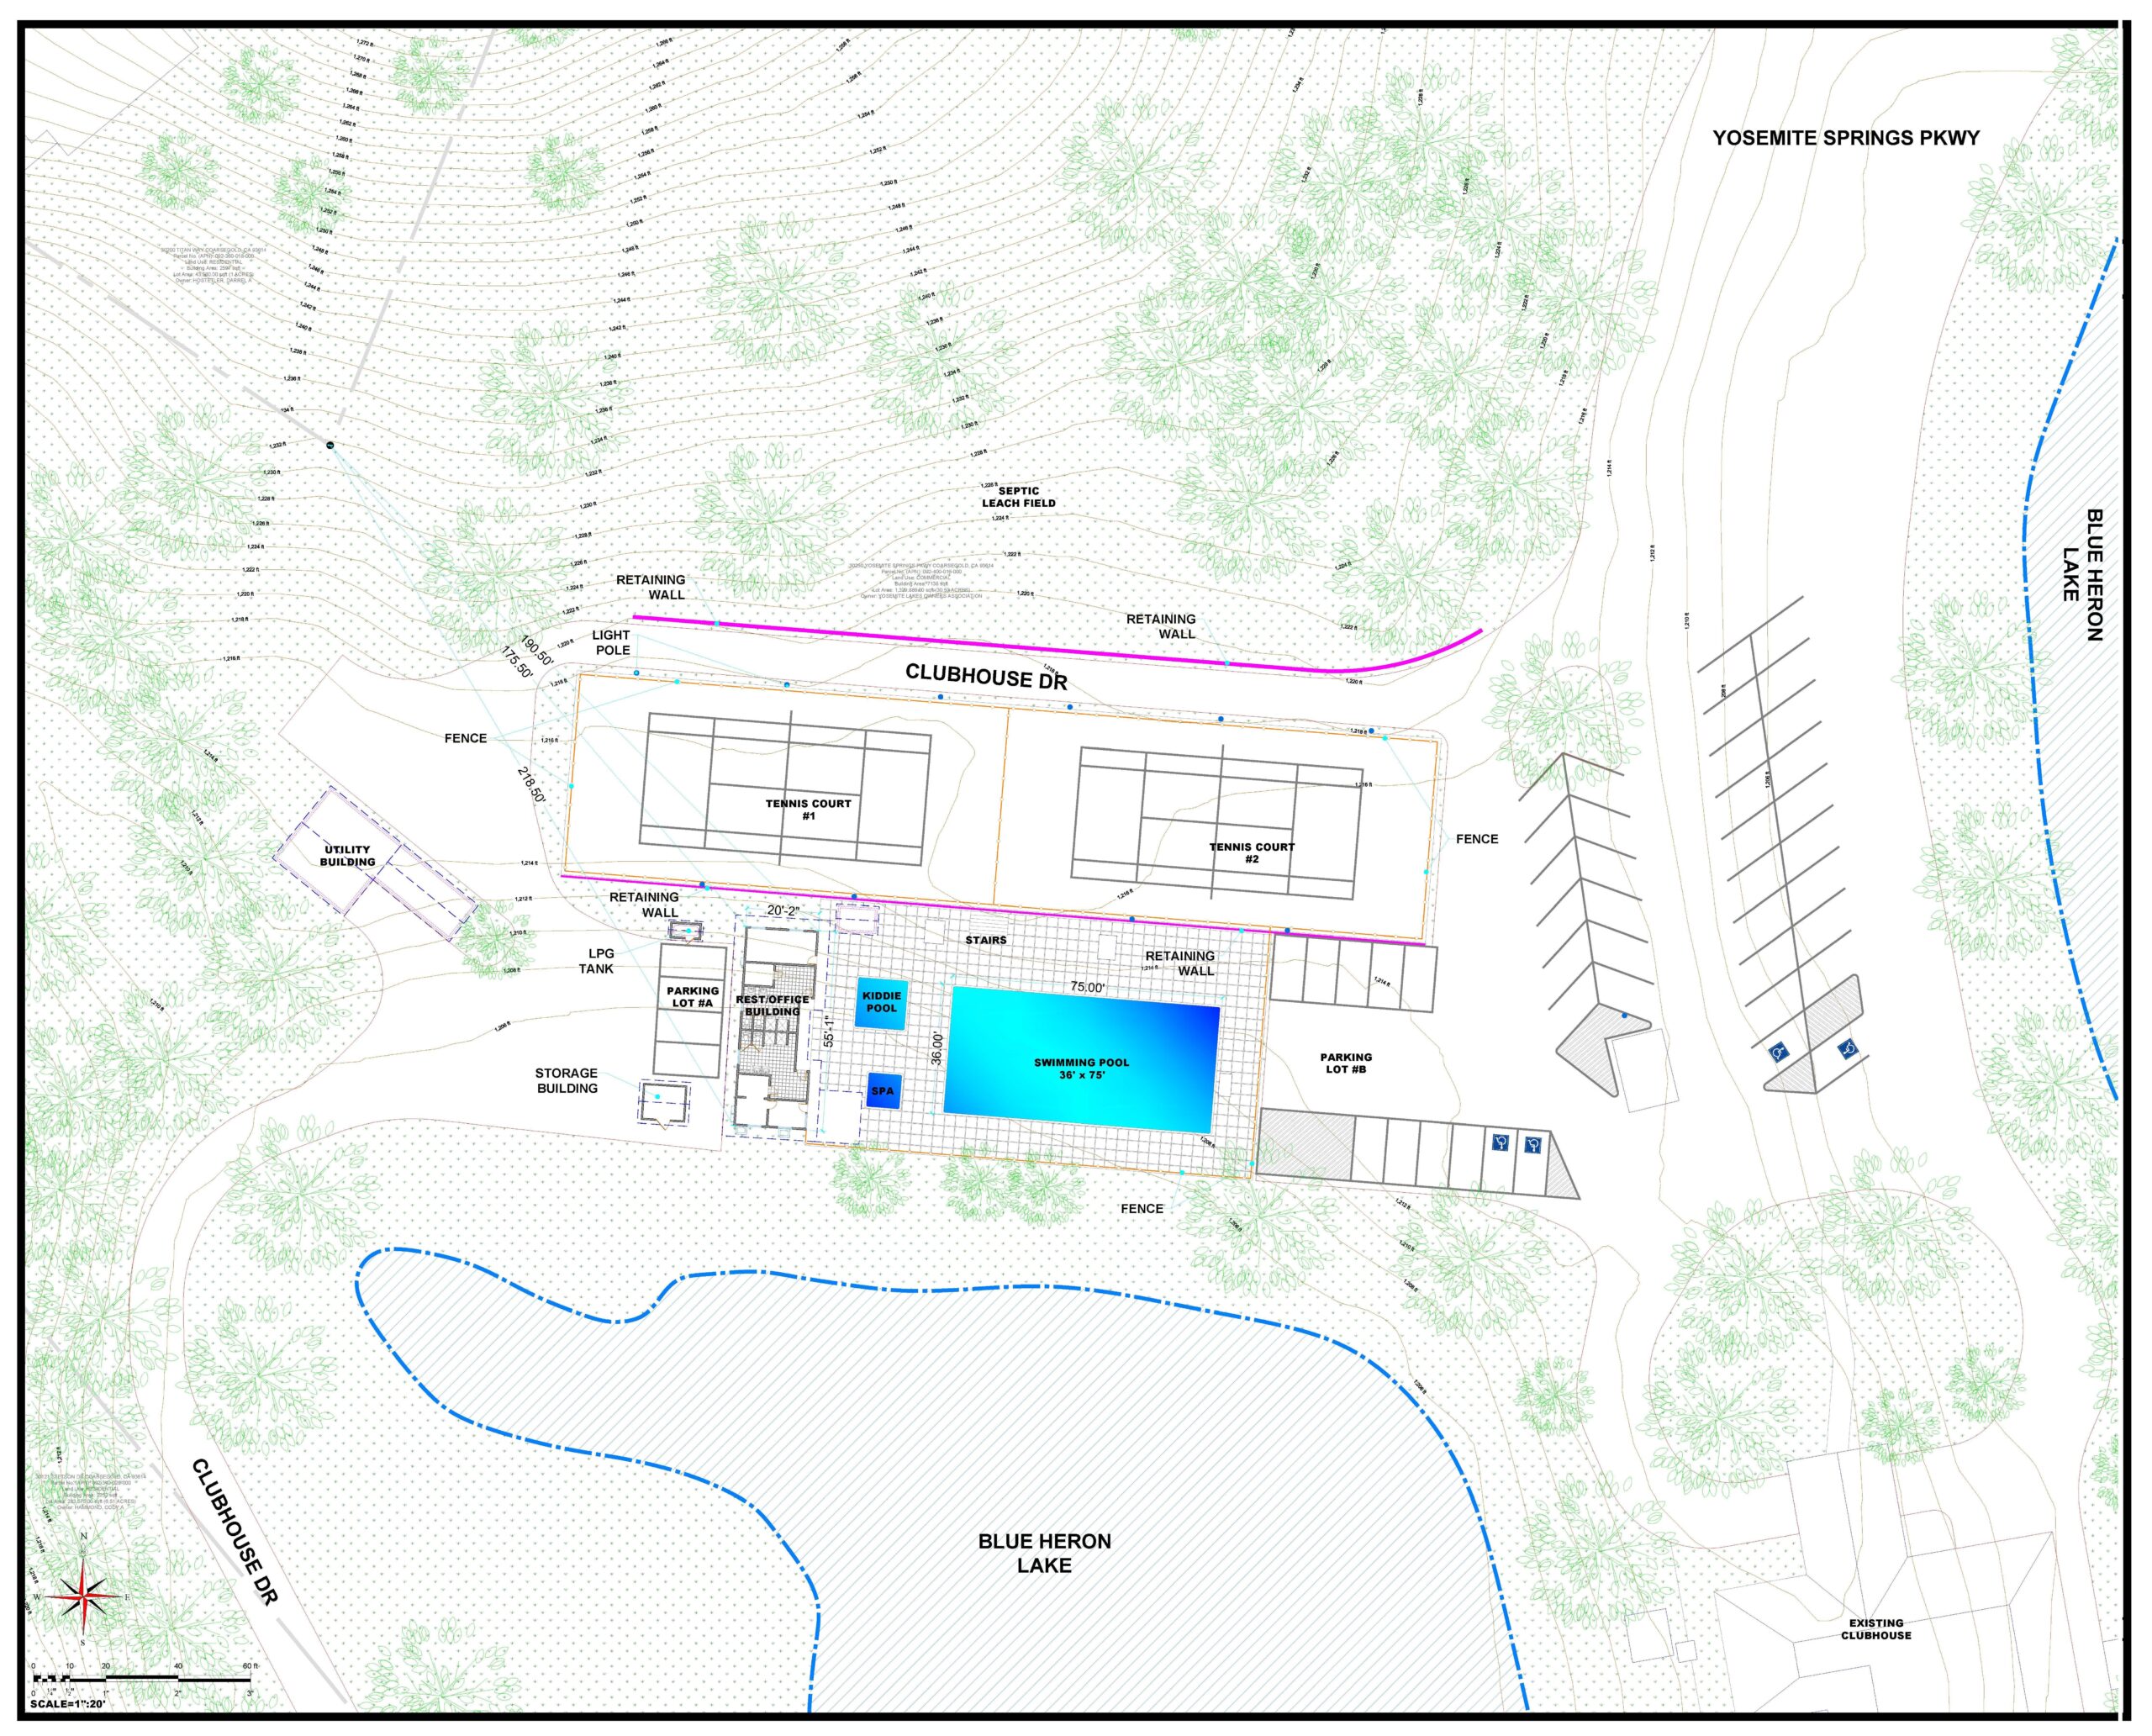 UPDATED SITE PLAN / TOPOGRAPHY LAYOUT